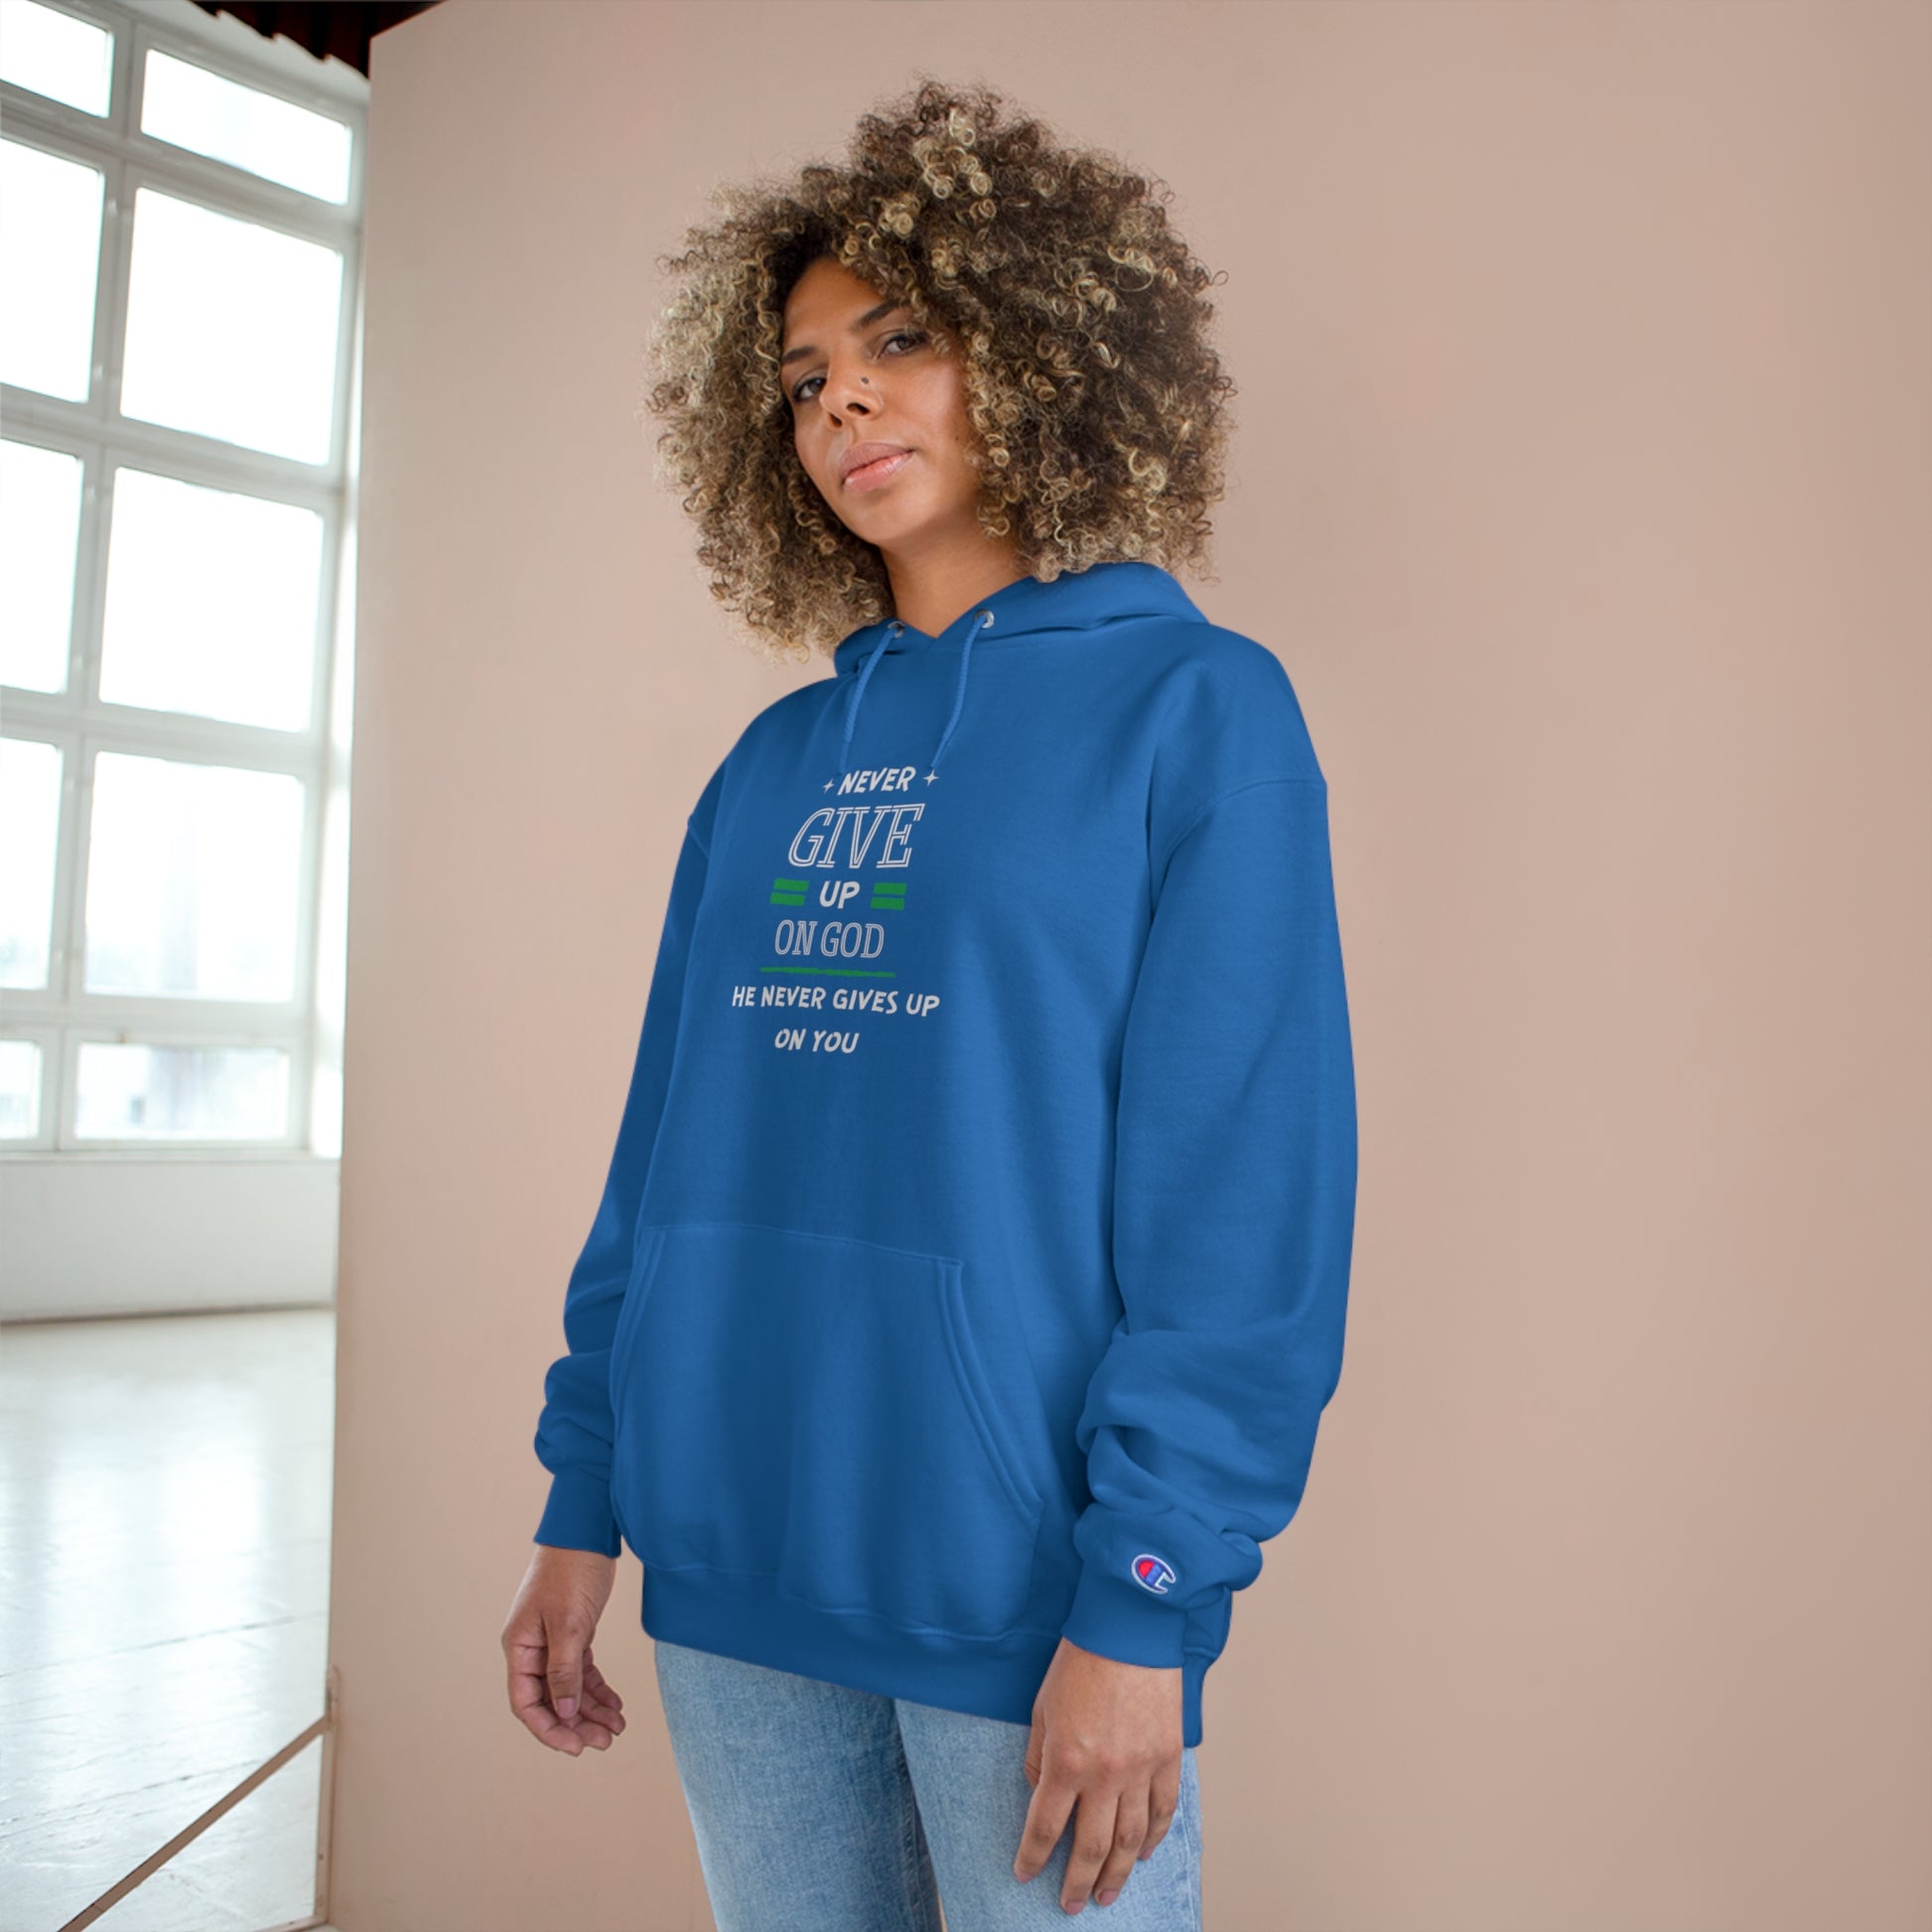 Never Give Up On God He Never Gives Up On You Unisex Champion Hoodie Printify